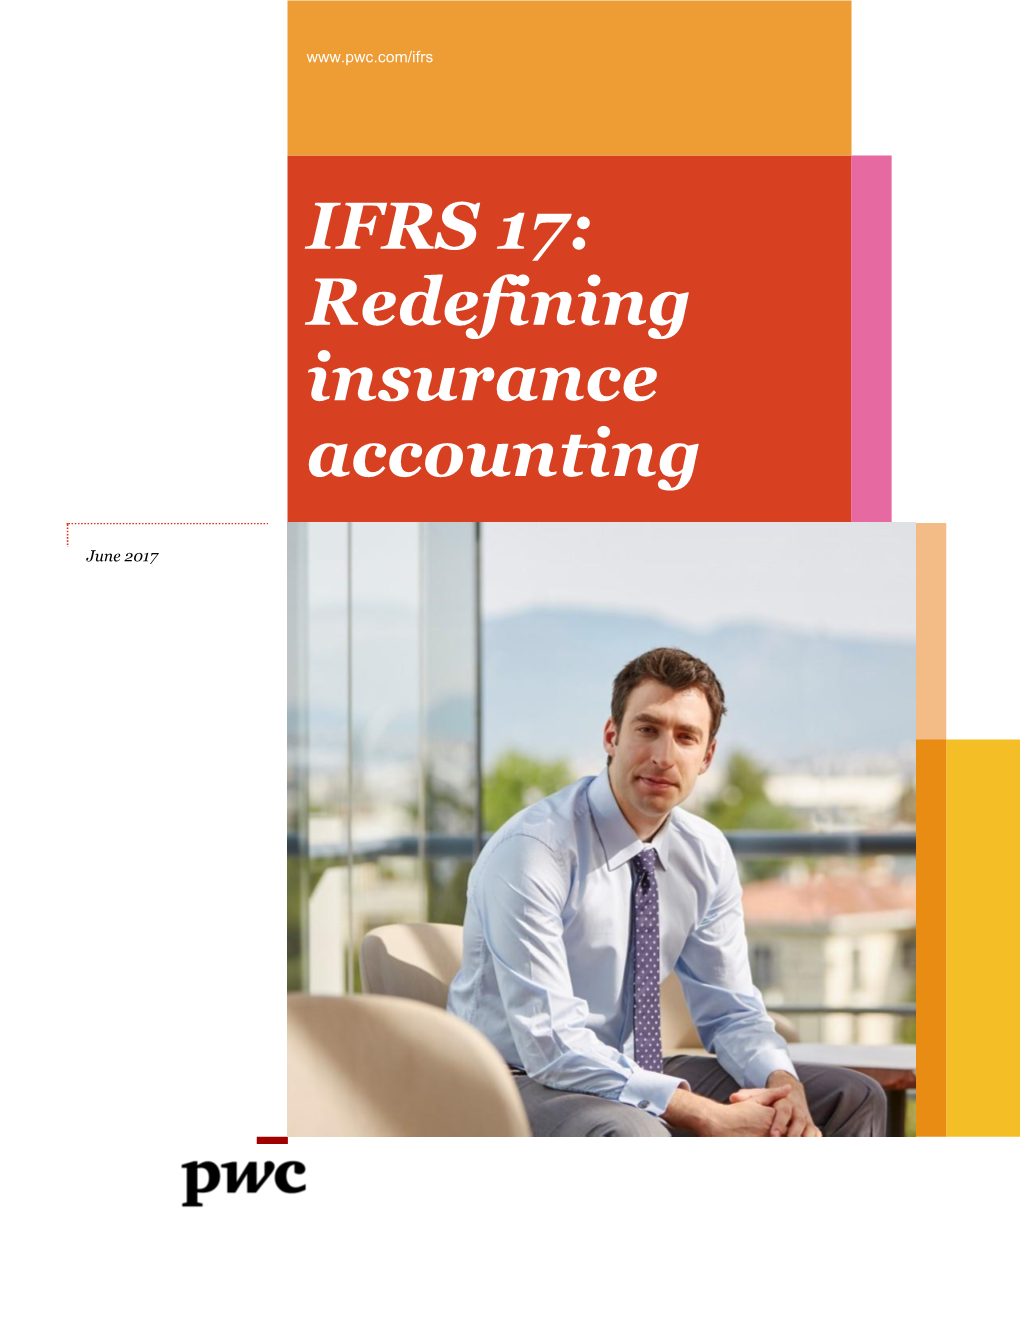 IFRS 17: Redefining Insurance Accounting